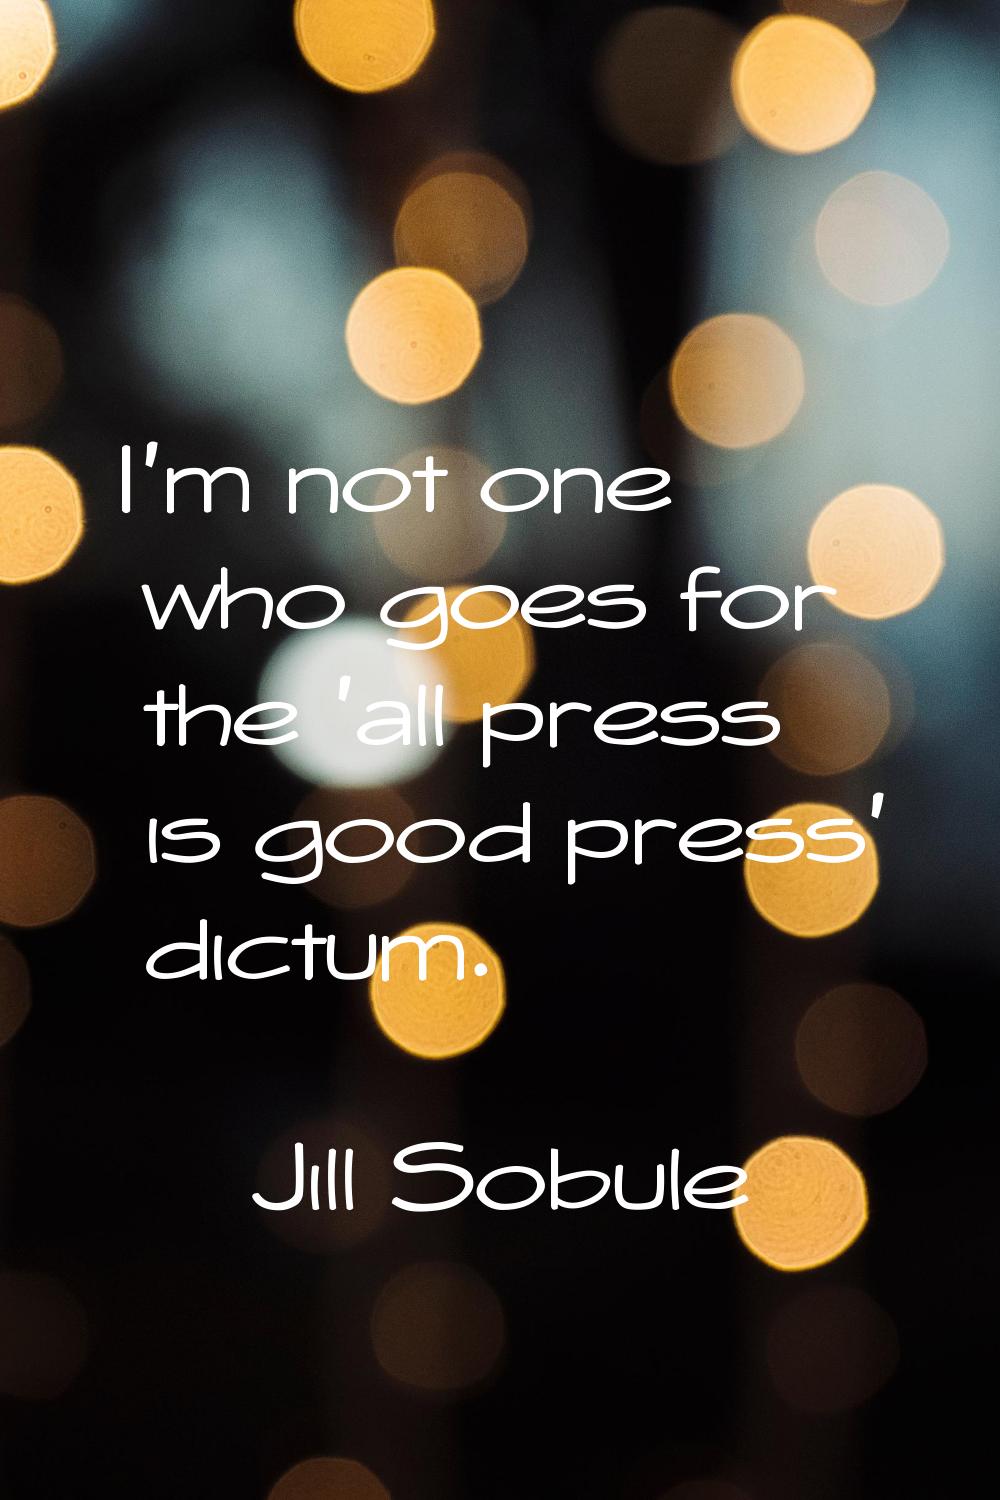 I'm not one who goes for the 'all press is good press' dictum.